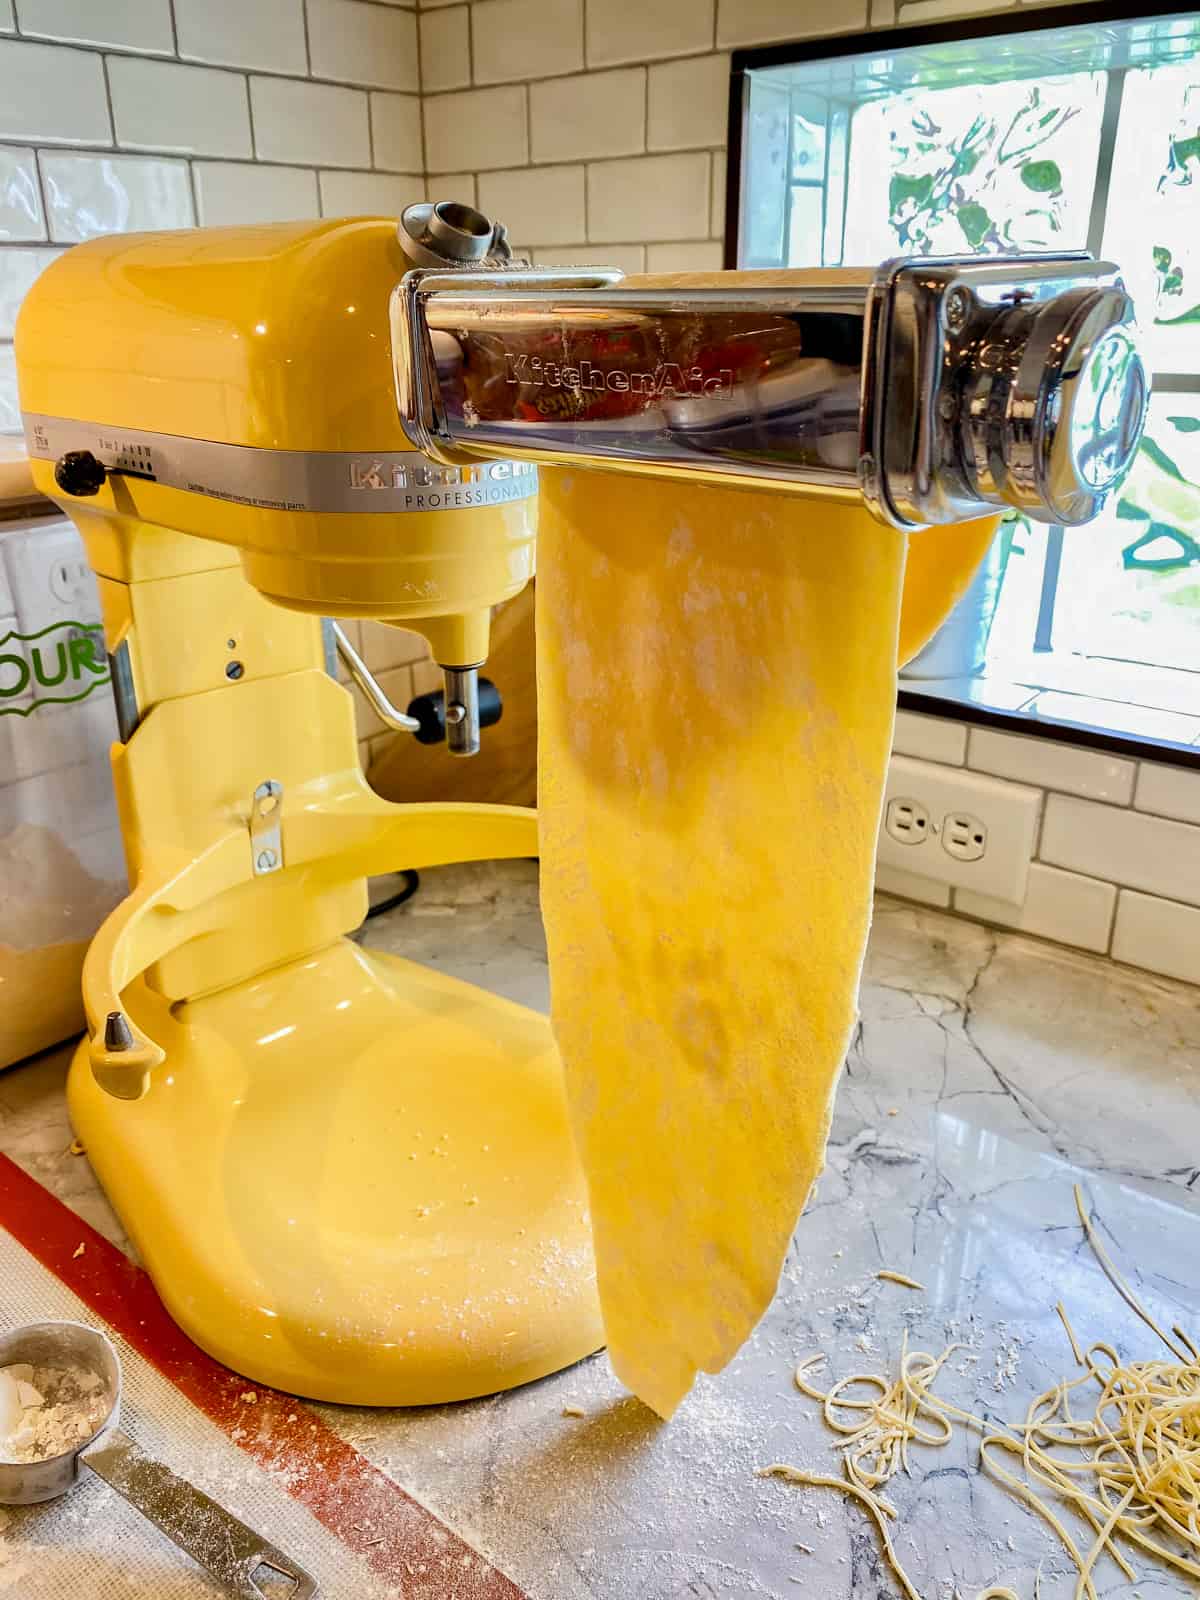 KitchenAid mixer with pasta attachment and dough going through it.